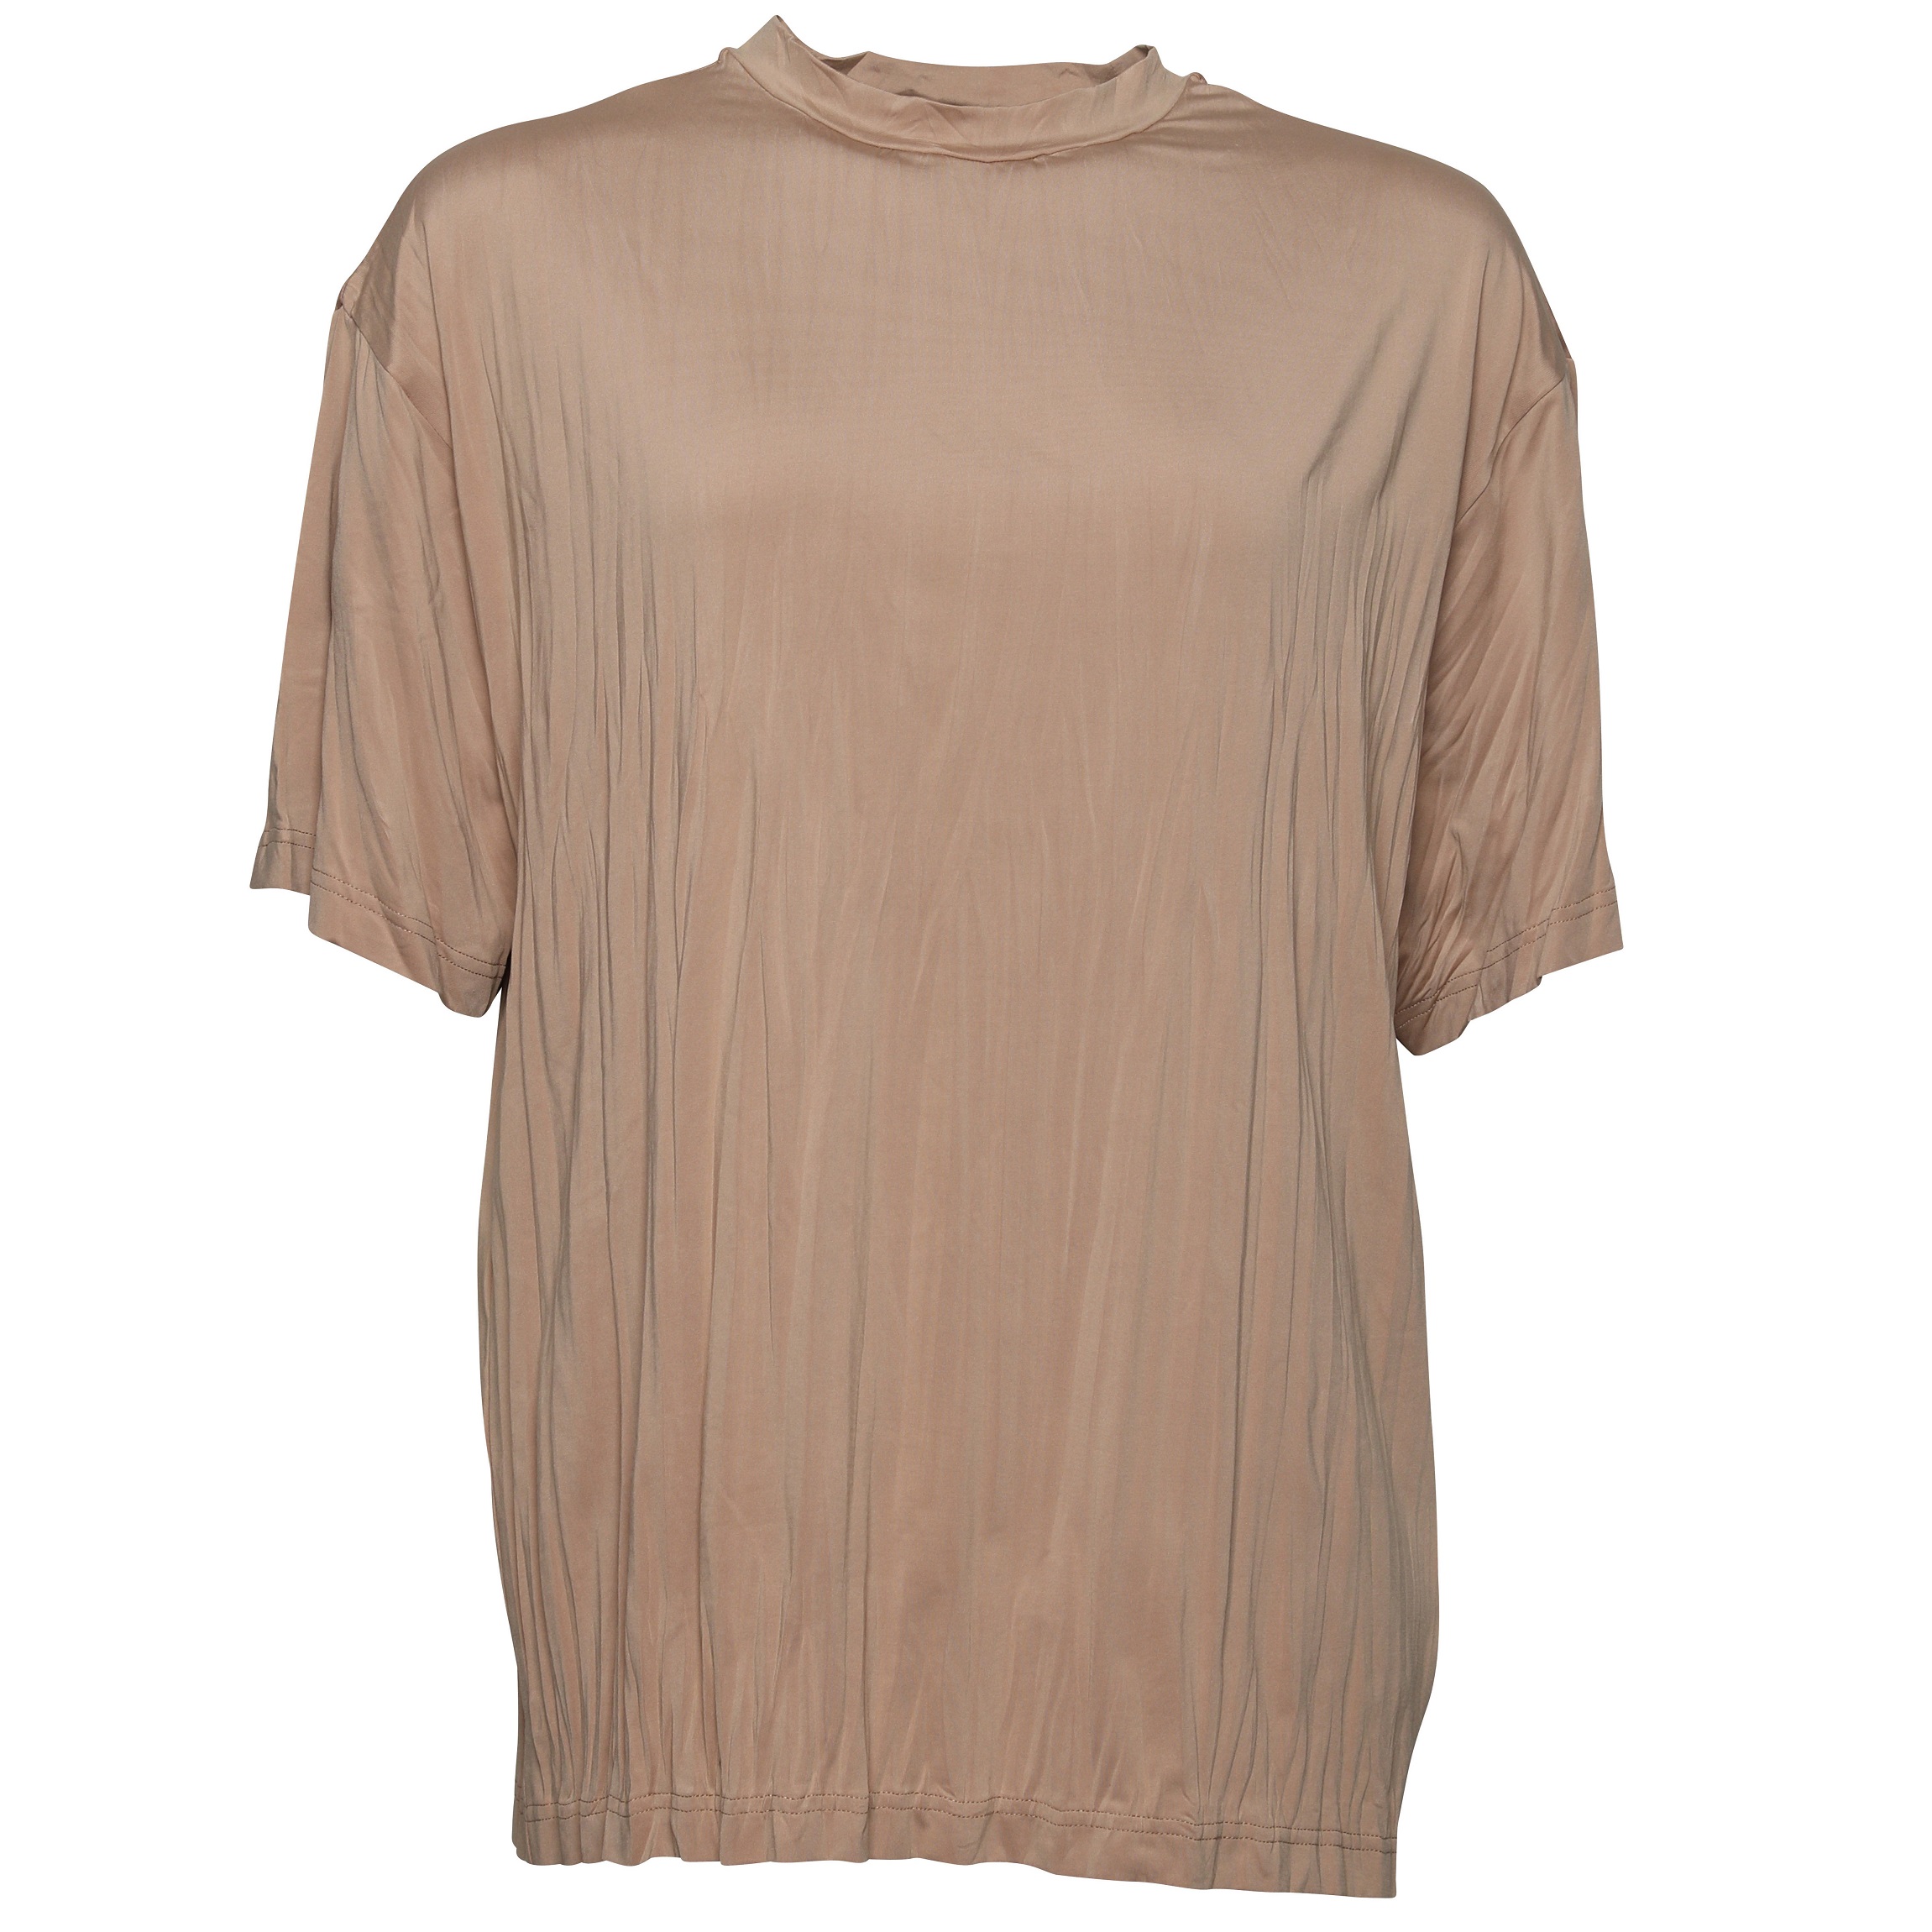 Acne Studios Pleated T-Shirt in Camel Brown